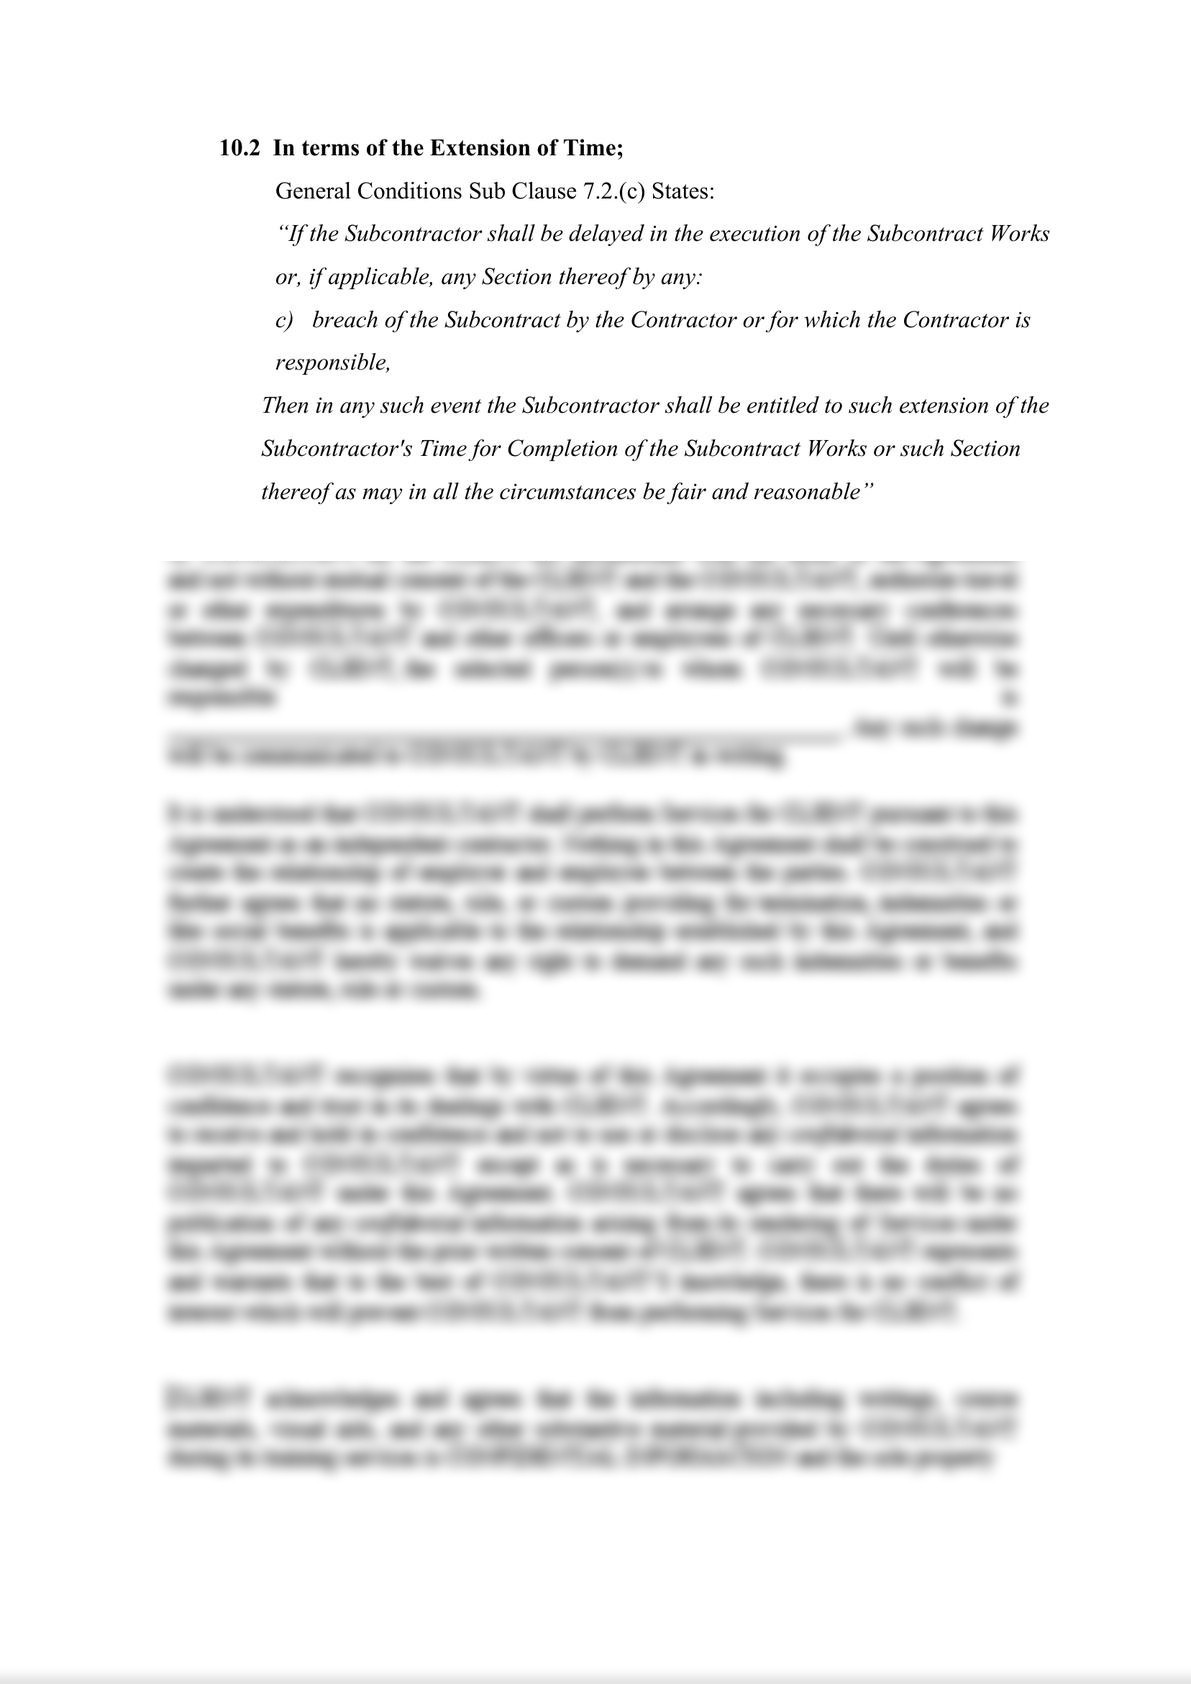 ICC-Request-for-Arbitration-6